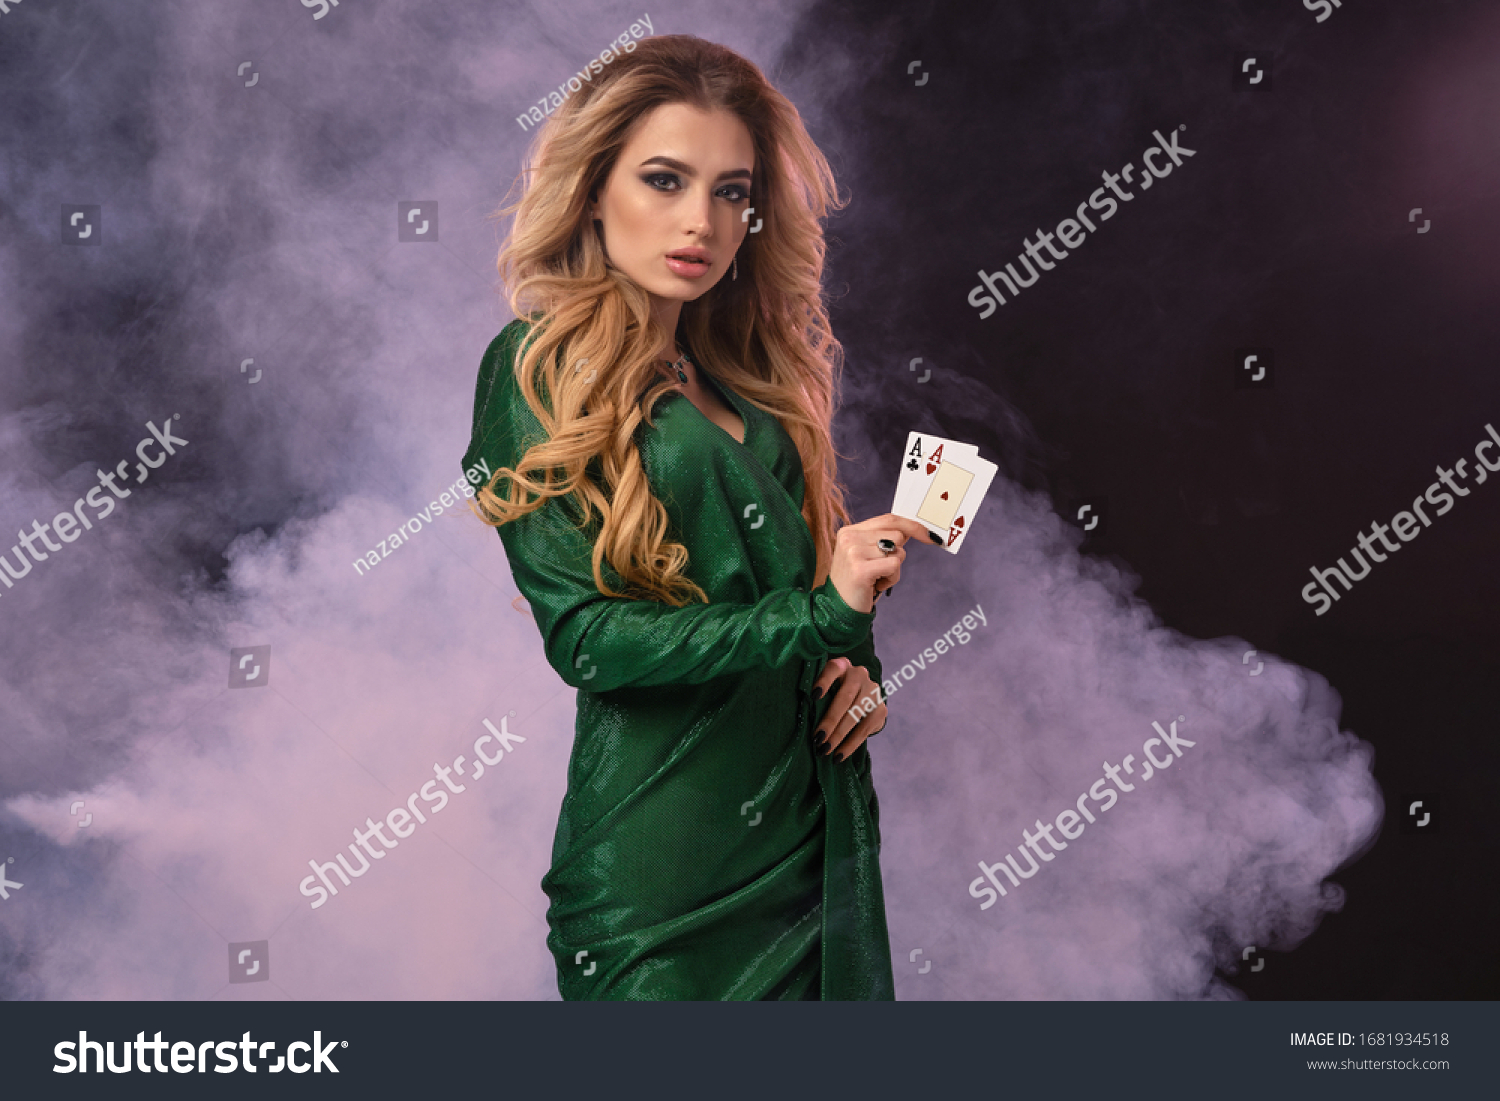 Blonde model with make-up, in green dress and jewelry. Put hand on hip, showing two aces, posing on black smoky background. Poker, casino. Close-up #1681934518